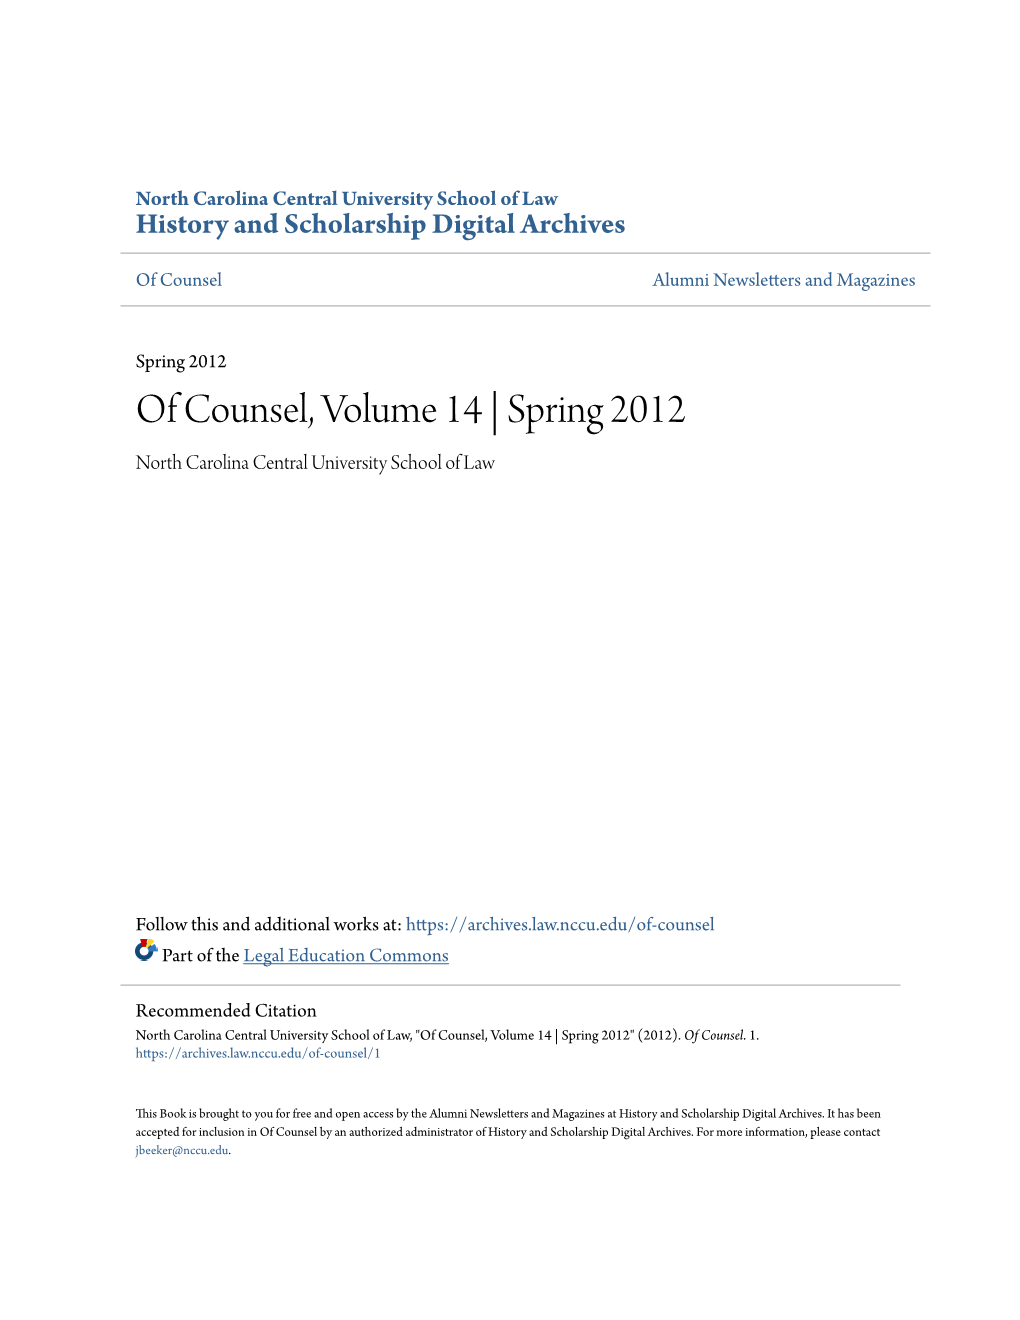 Of Counsel, Volume 14 | Spring 2012 North Carolina Central University School of Law